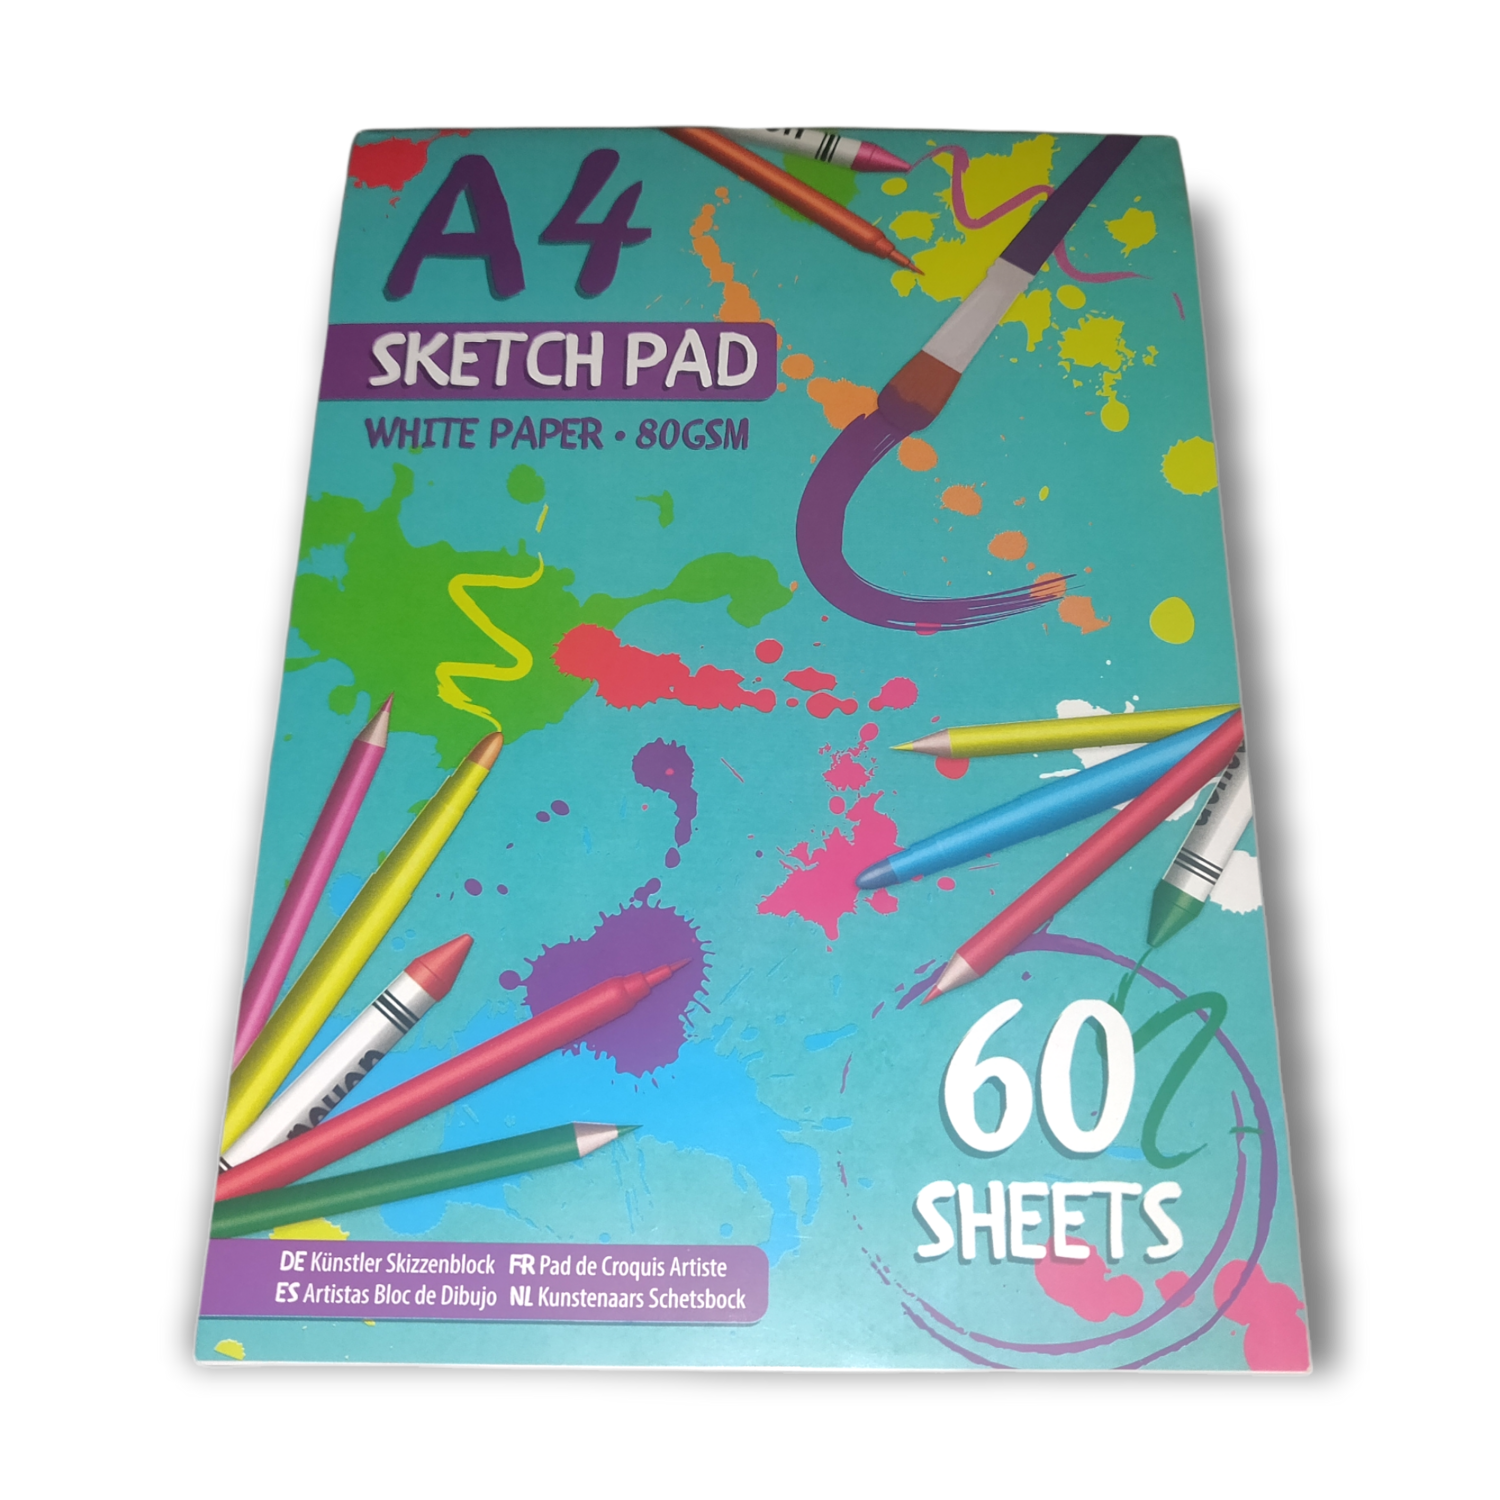 A4 Blue Sketch Pad - 60 White Sheets of 80gsm Paper